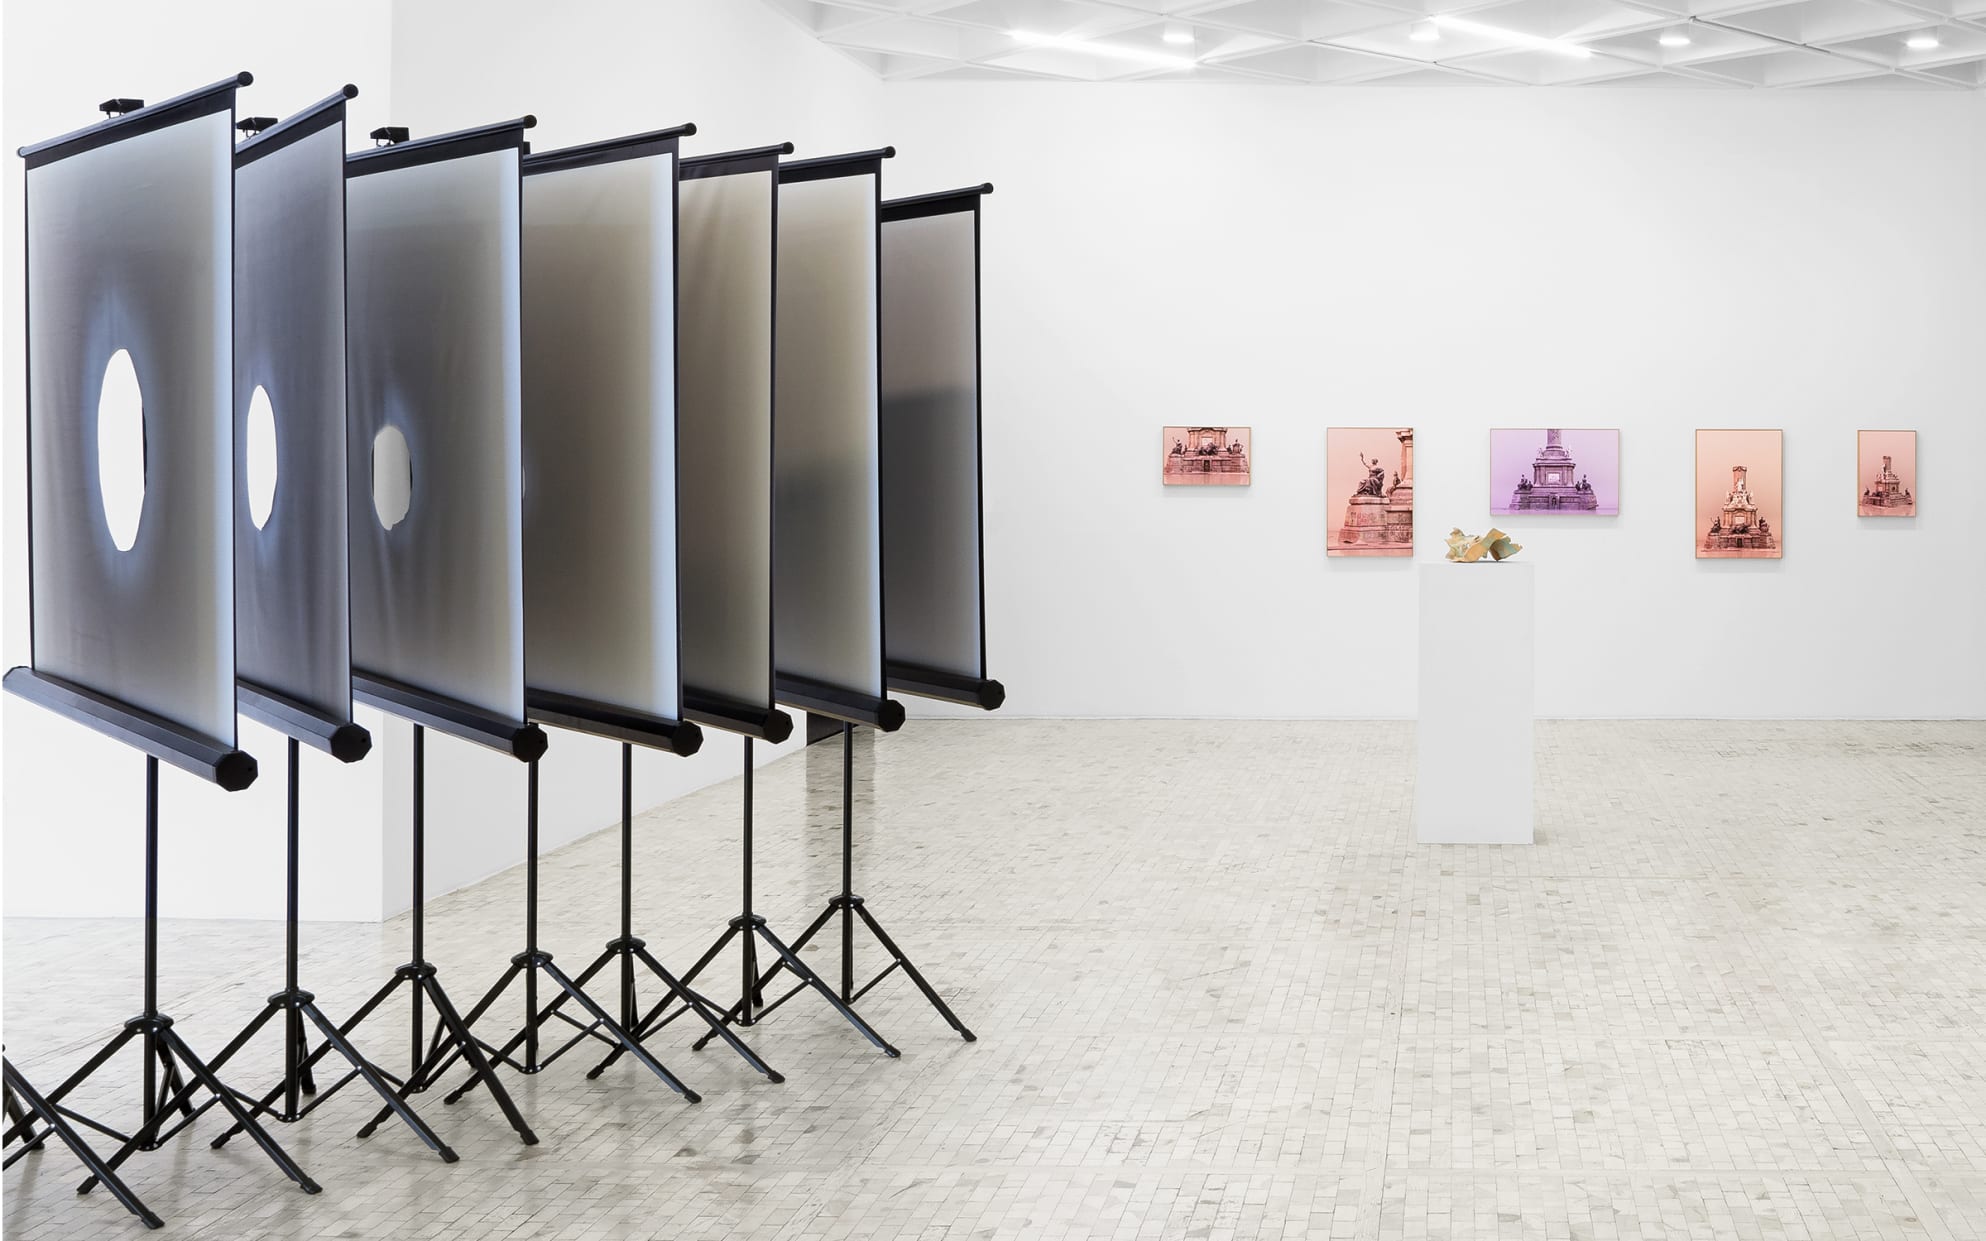 Installation view of ‘Otrxs Mundxs’, Museo Tamayo, Mexico City, 2020 - 2021. Shown here are works by Miguel Calderón (left) and Julieta Gil (right). Courtesy of Museo Tamayo, INBAL. Photo by Gerardo Landa and Eduardo López for GLR Estudio.